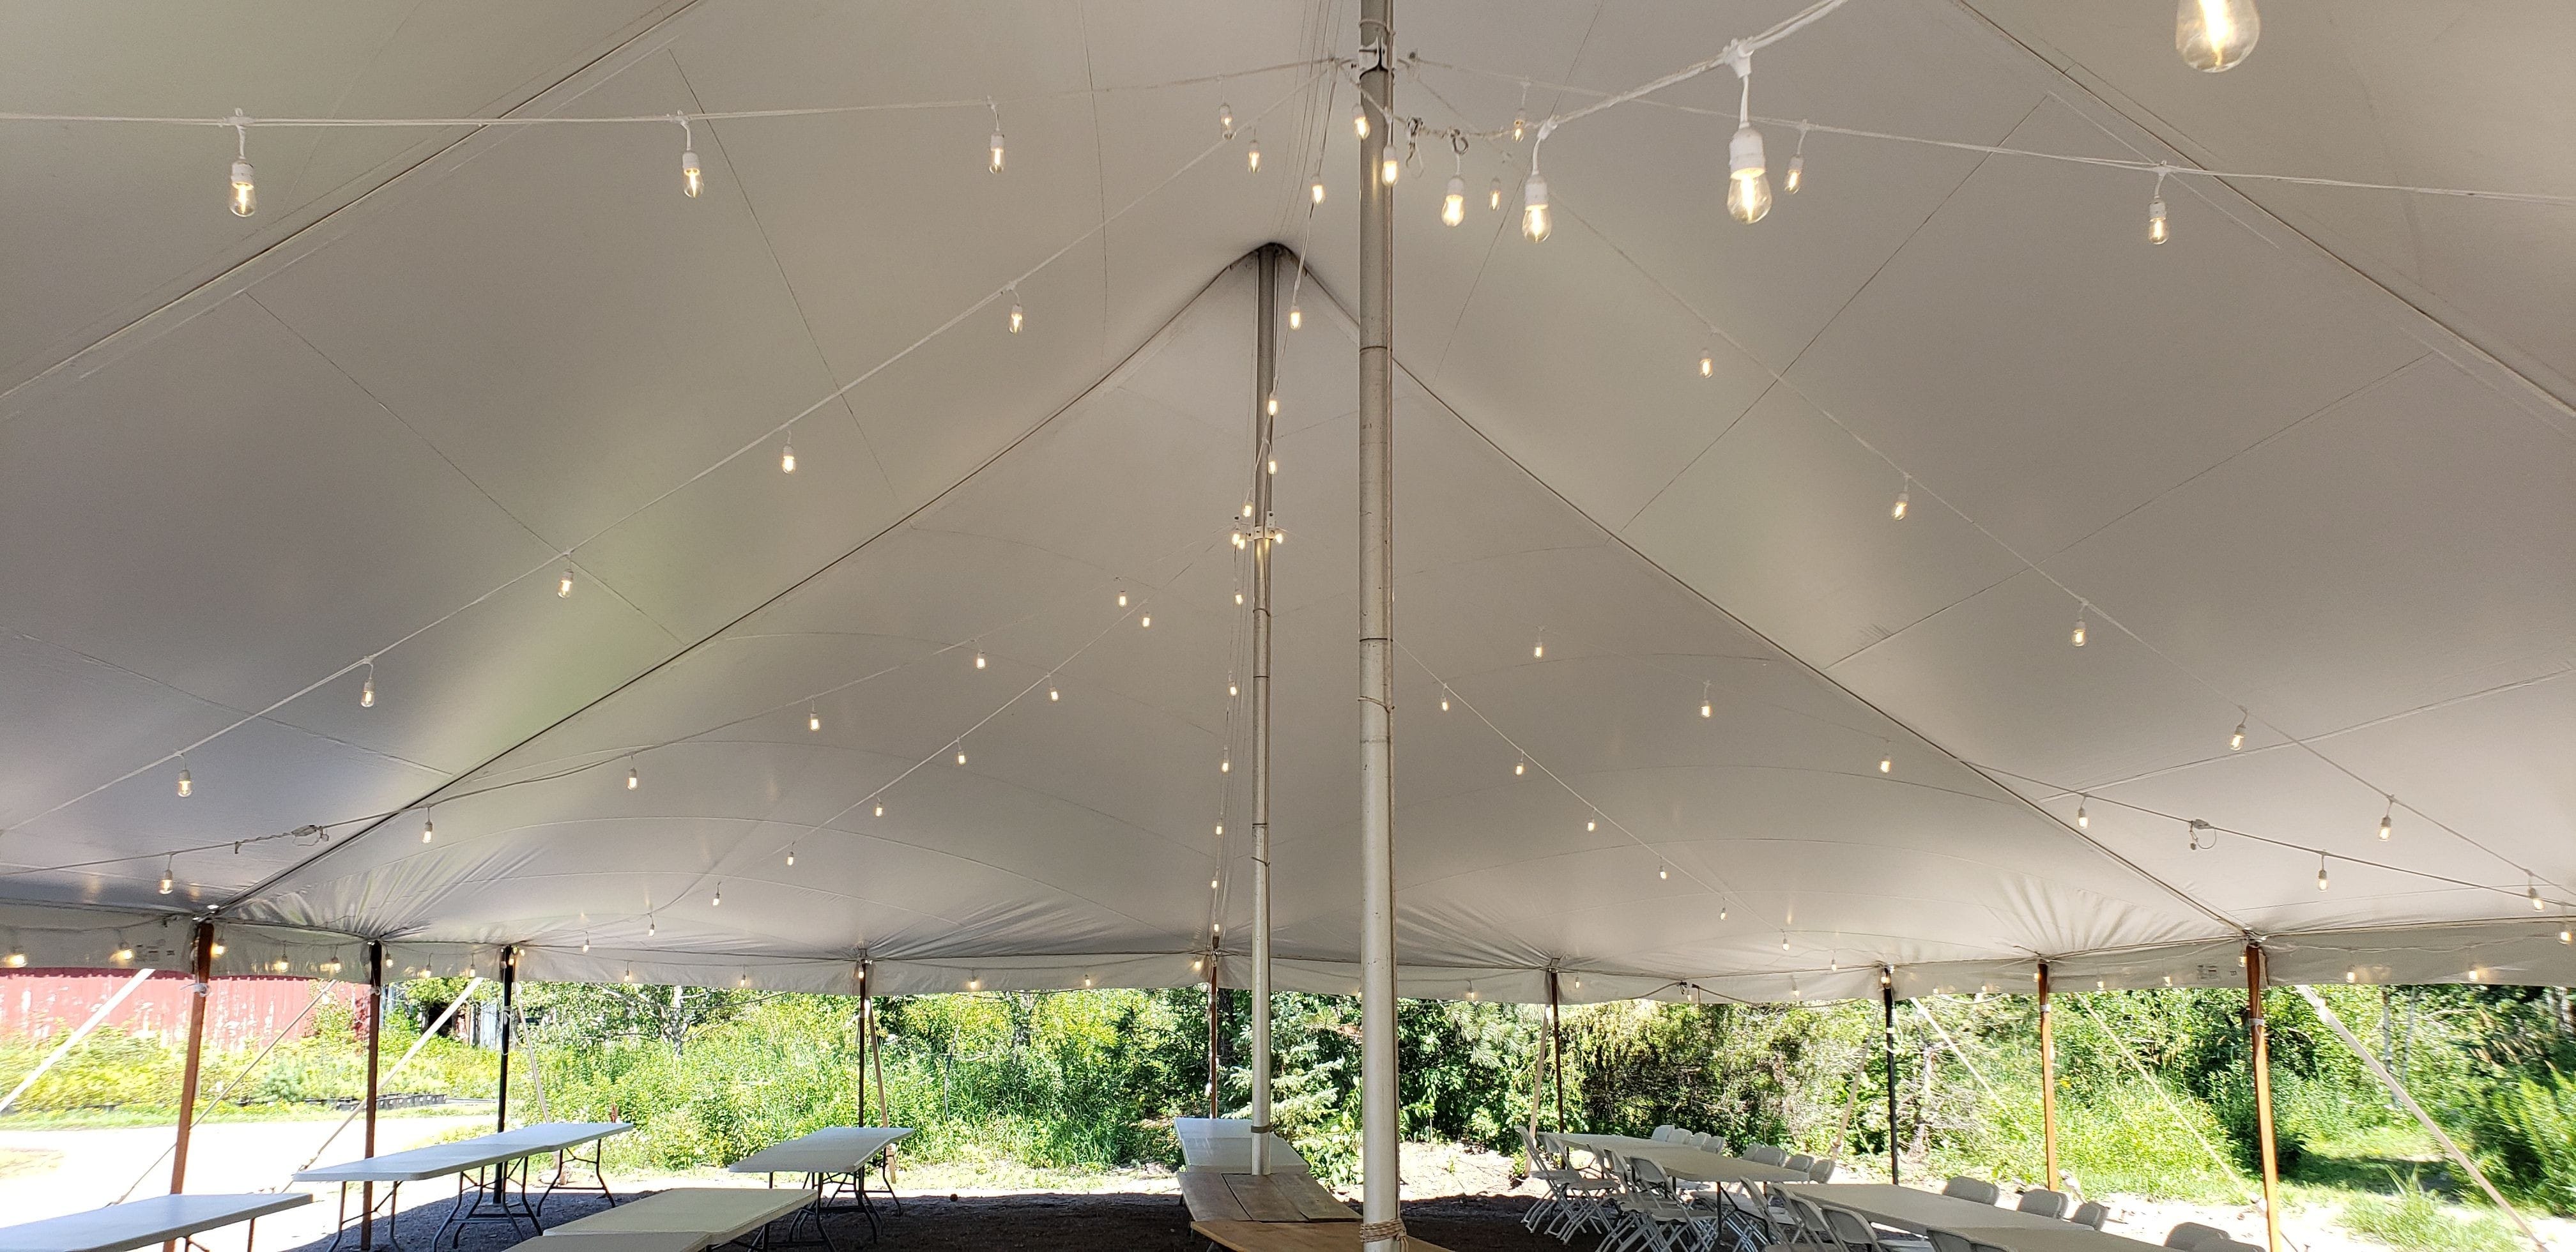 Tent wedding lighting with bistro at Sitio Events